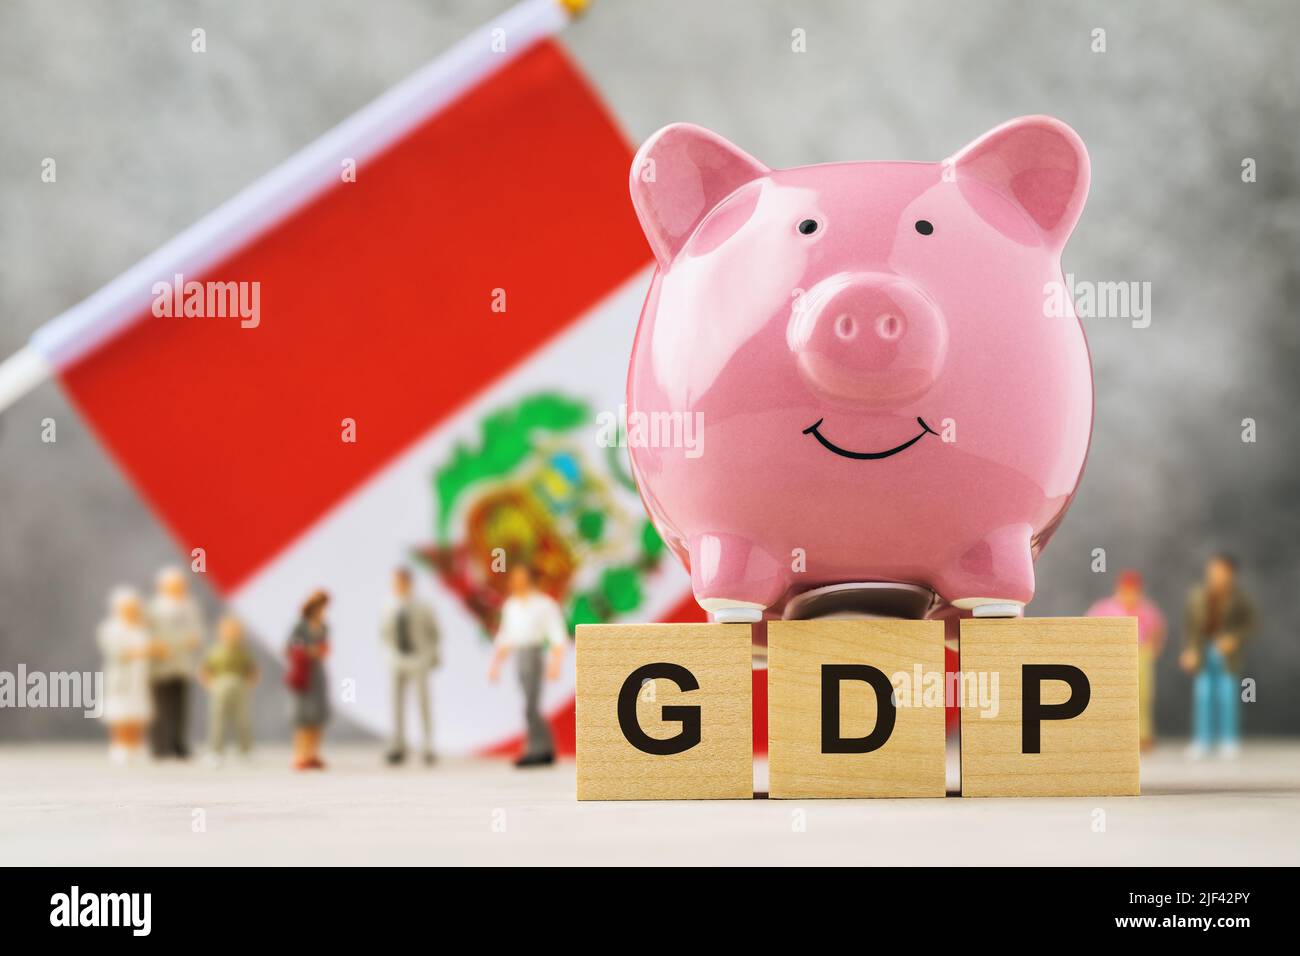 Piggy bank, wooden cubes with text, toy people made of plastic and a flag on an abstract background, a concept on the theme of GDP of Peru Stock Photo